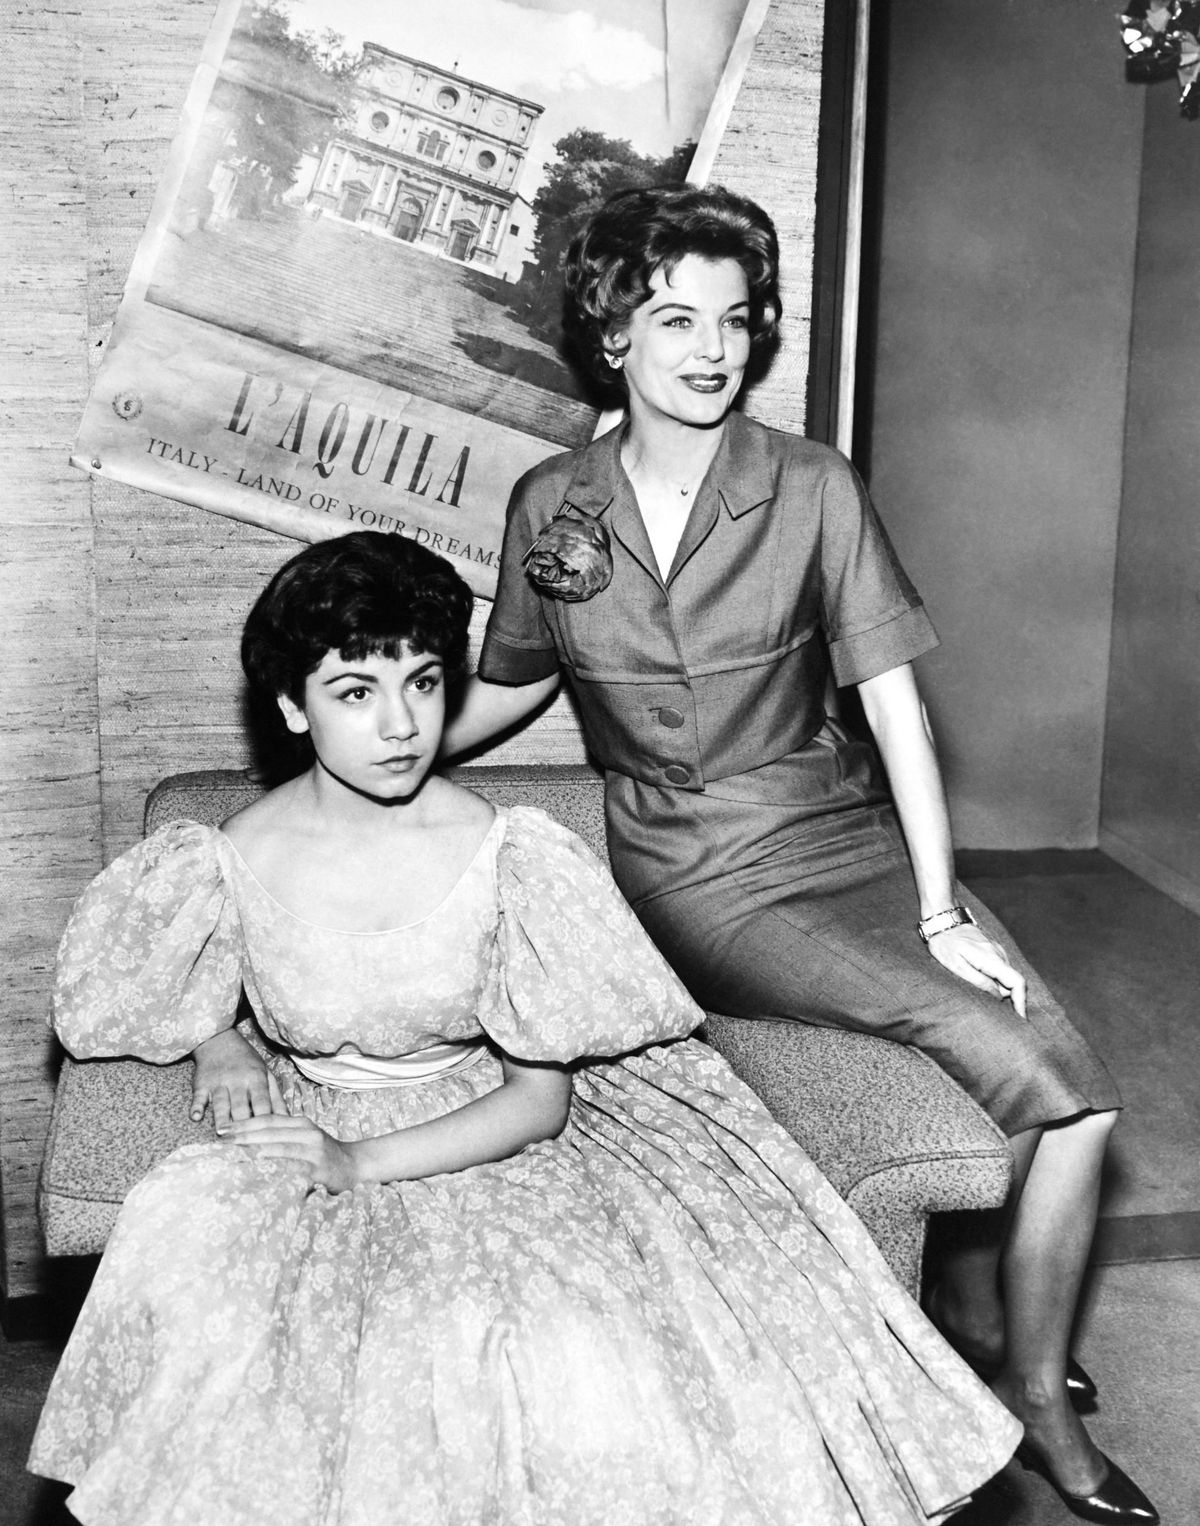 annette-funicello-marjorie-lord-make-room-for-taddy